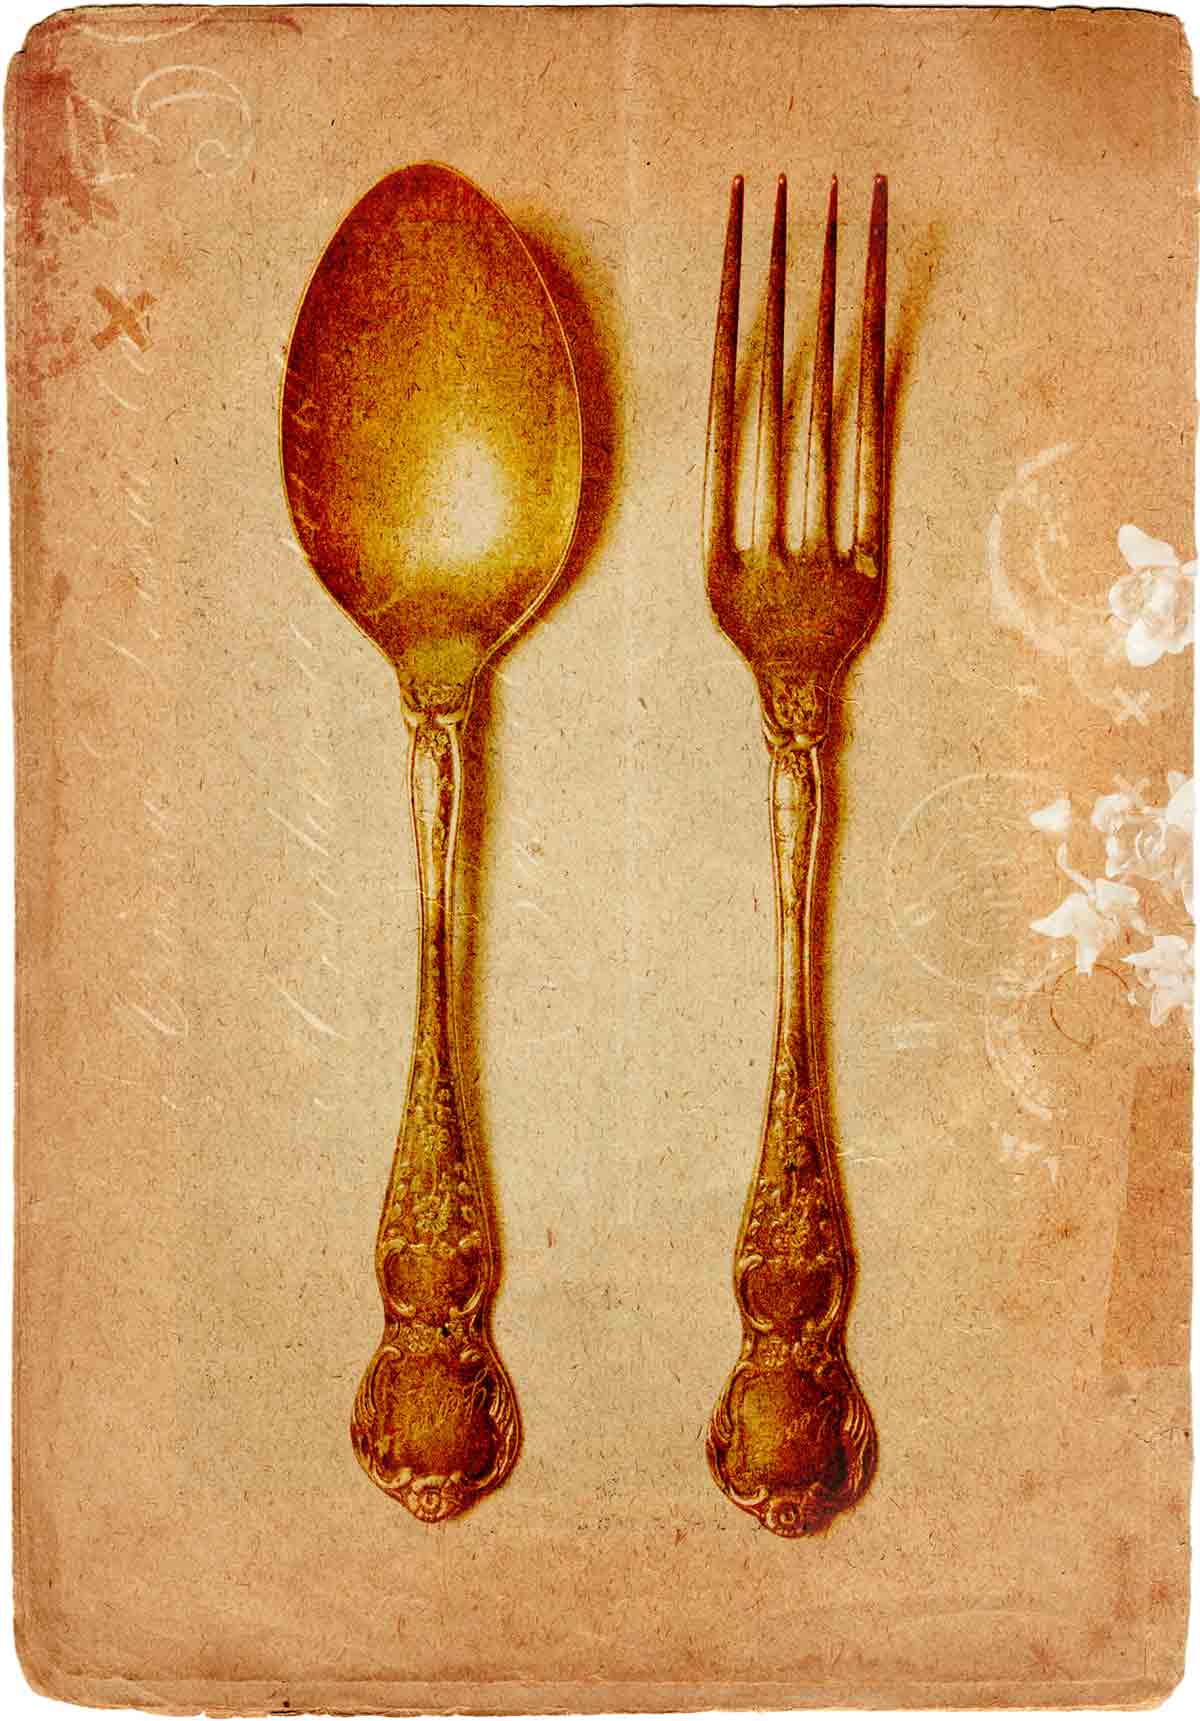 A sepia image of old silverware.